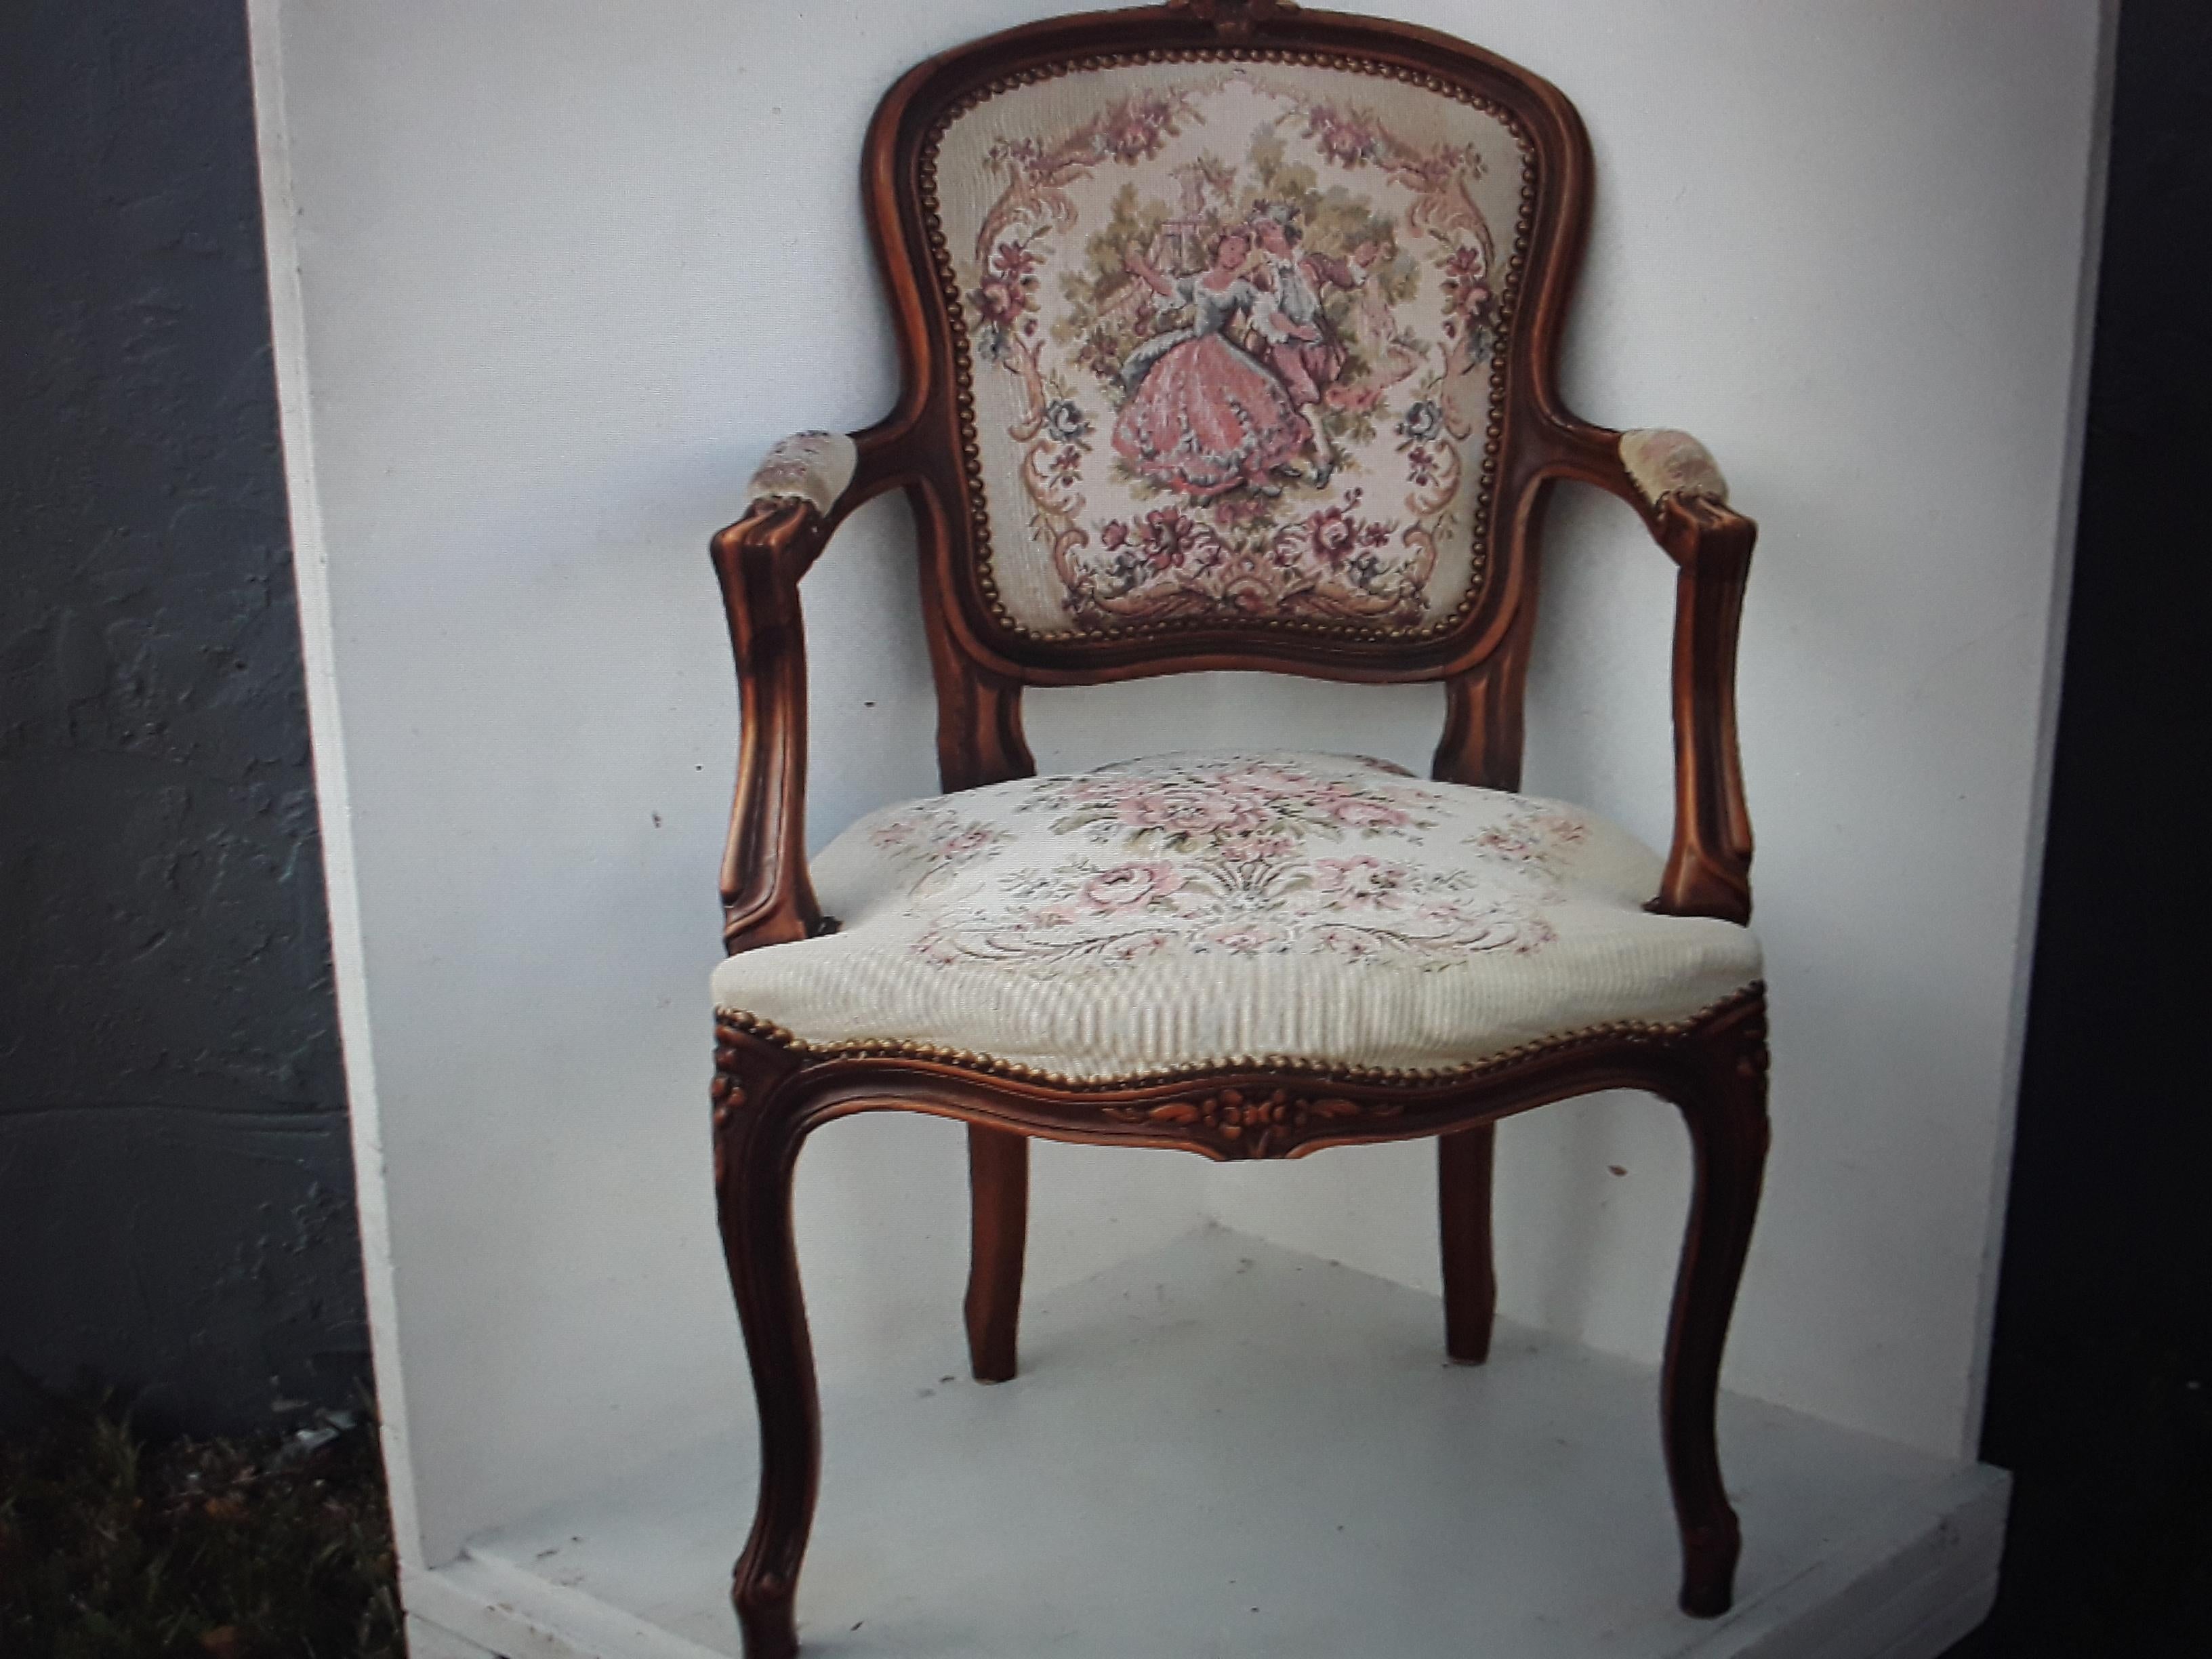 19thc French Antique Louis XV style Carved Wood Rococo Armchair. Very nicely carved. Romantic scene aupholstery.